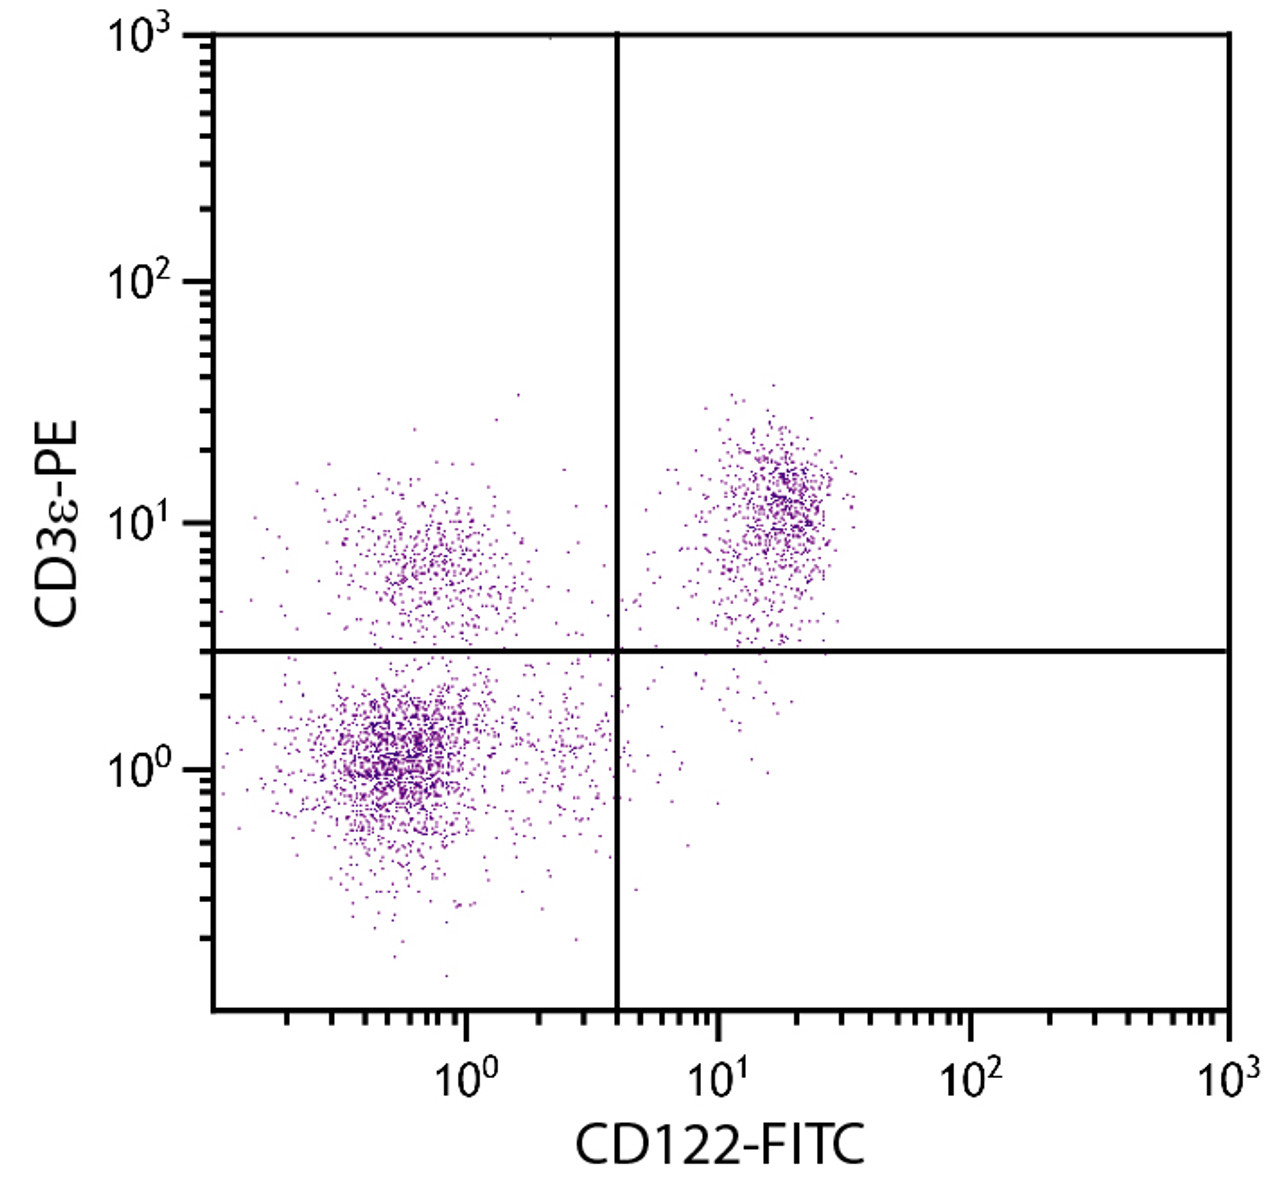 BALB/c mouse splenocytes were stained with Rat Anti-Mouse CD112-FITC (Cat. No. 99-061) and Rat Anti-Mouse CD3?-PE .